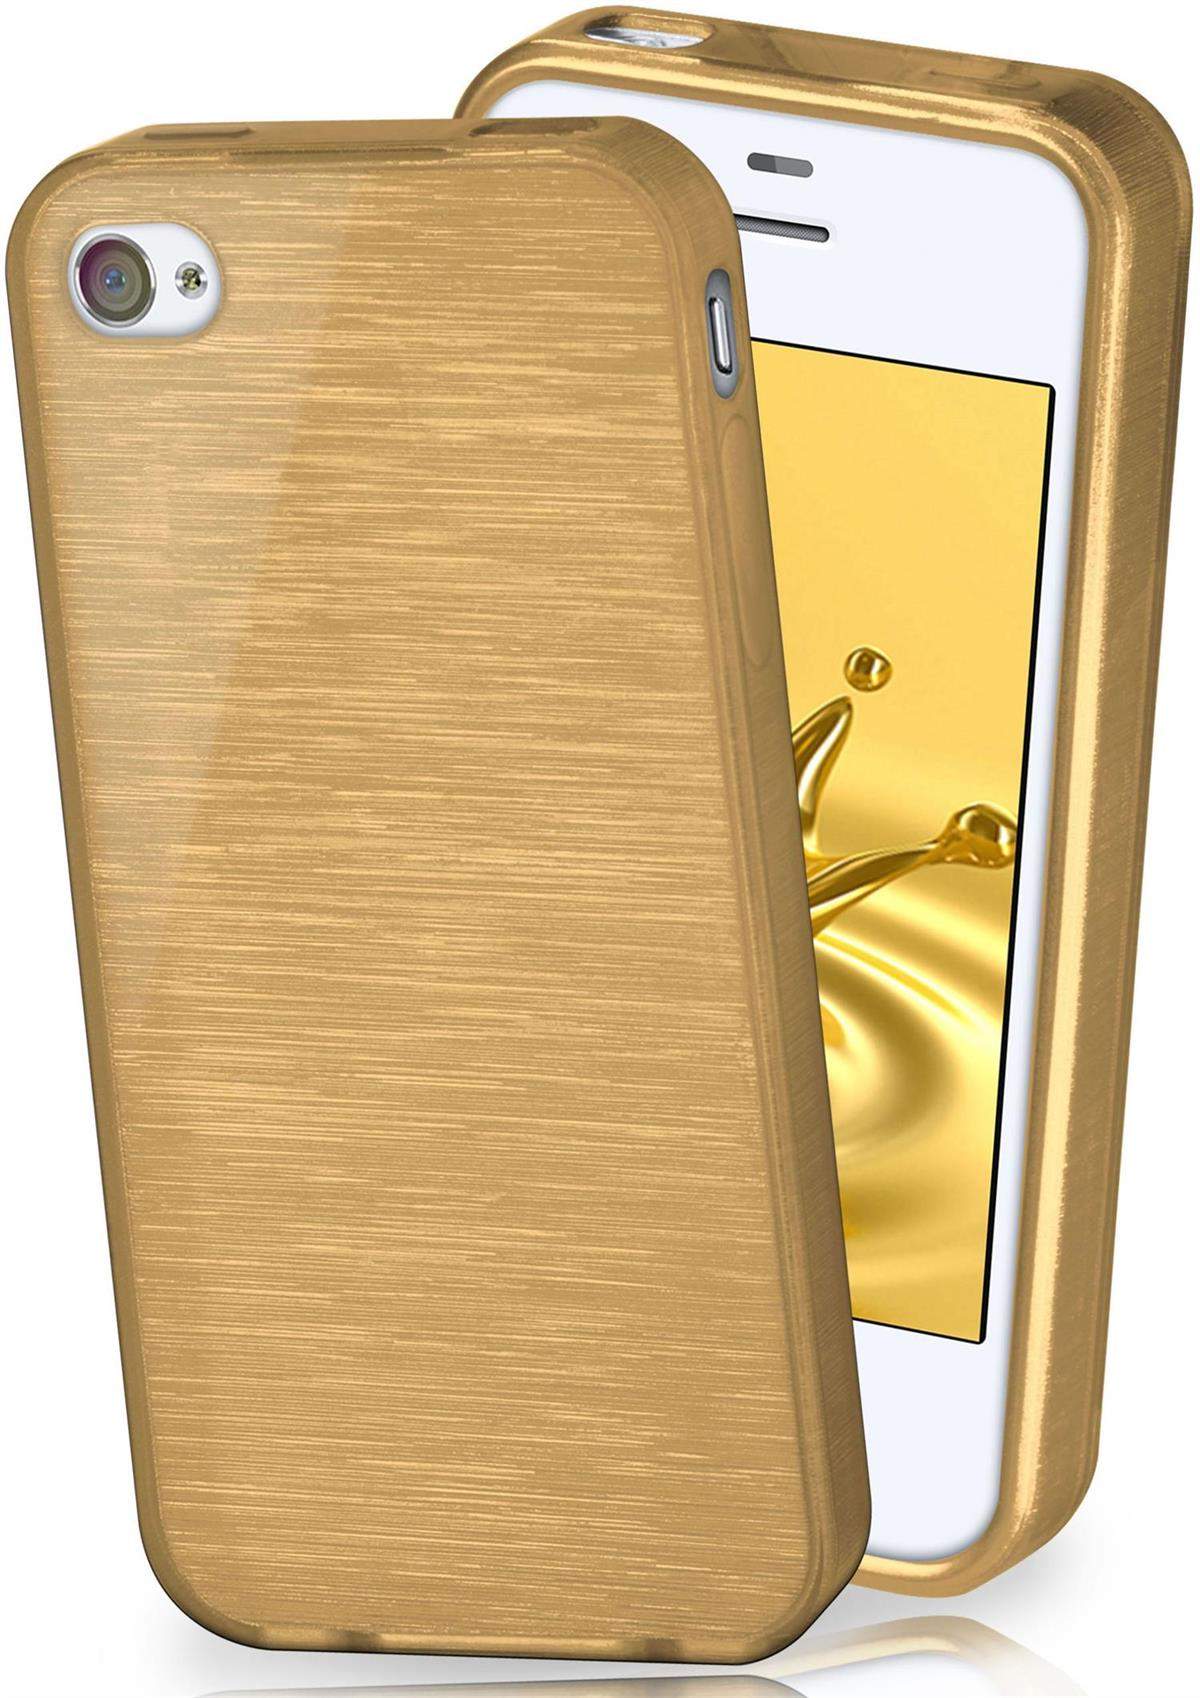 Case, iPhone Apple, Brushed Ivory-Gold MOEX 4S, Backcover,